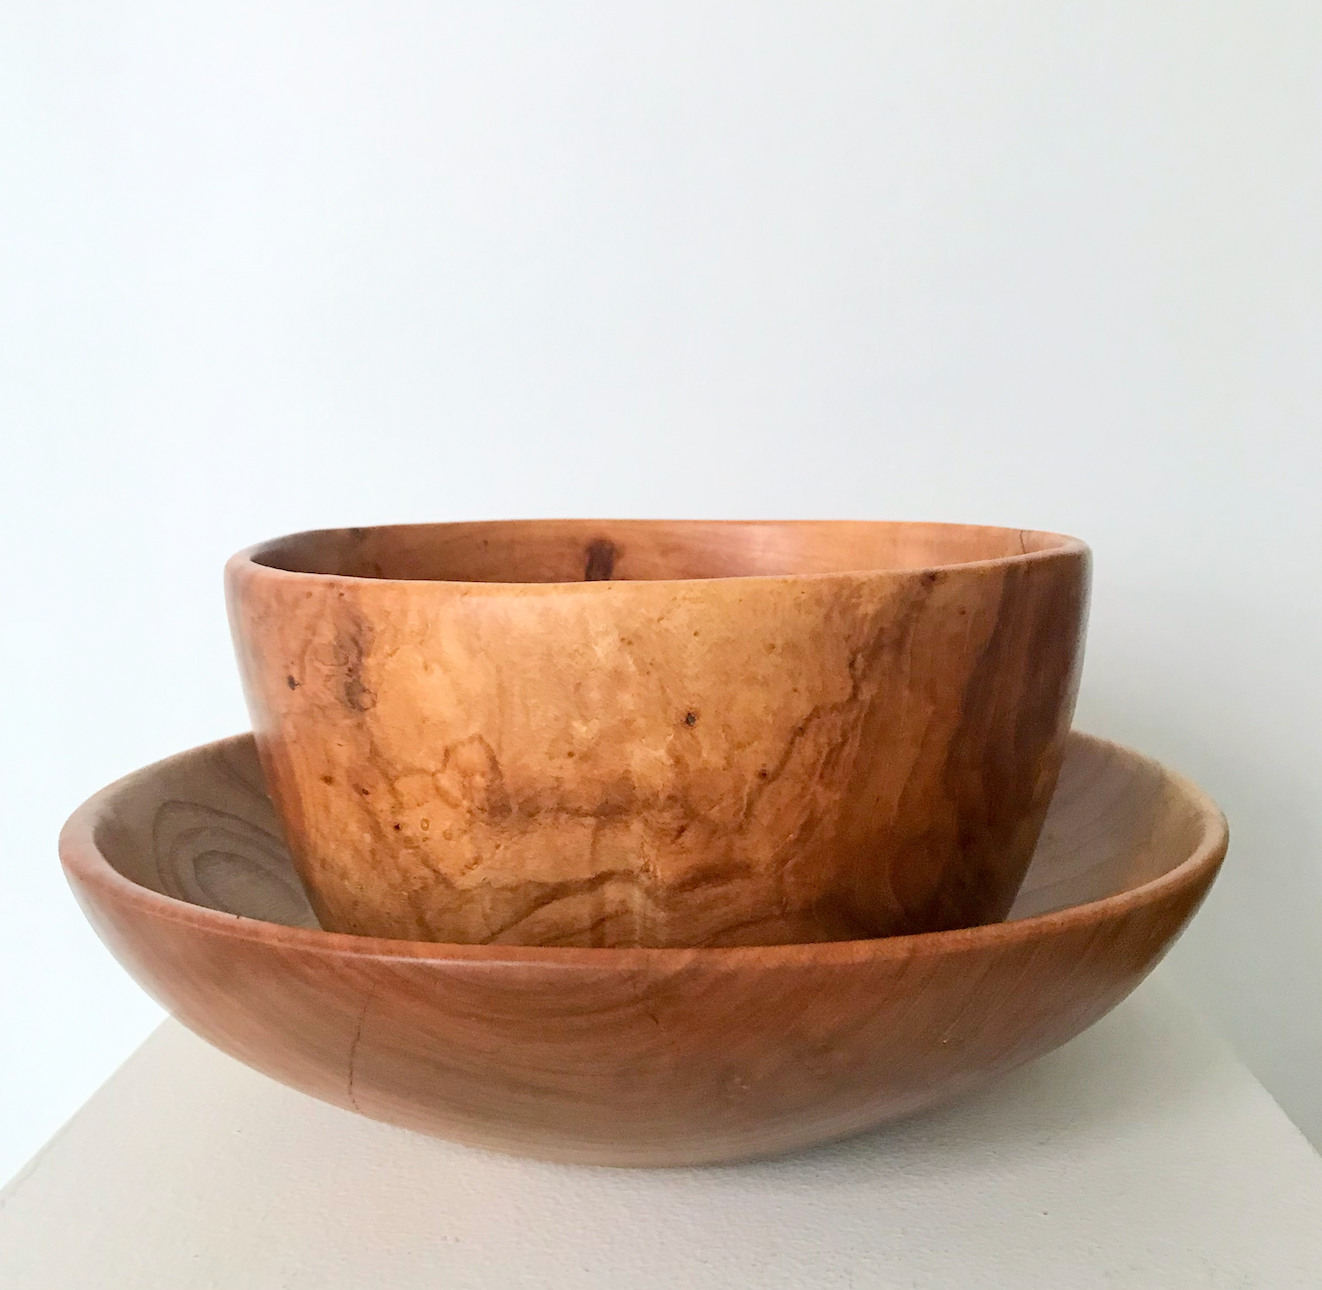 Richard Porter - Wood - Xlarge Bowls and Wood Workings (various)